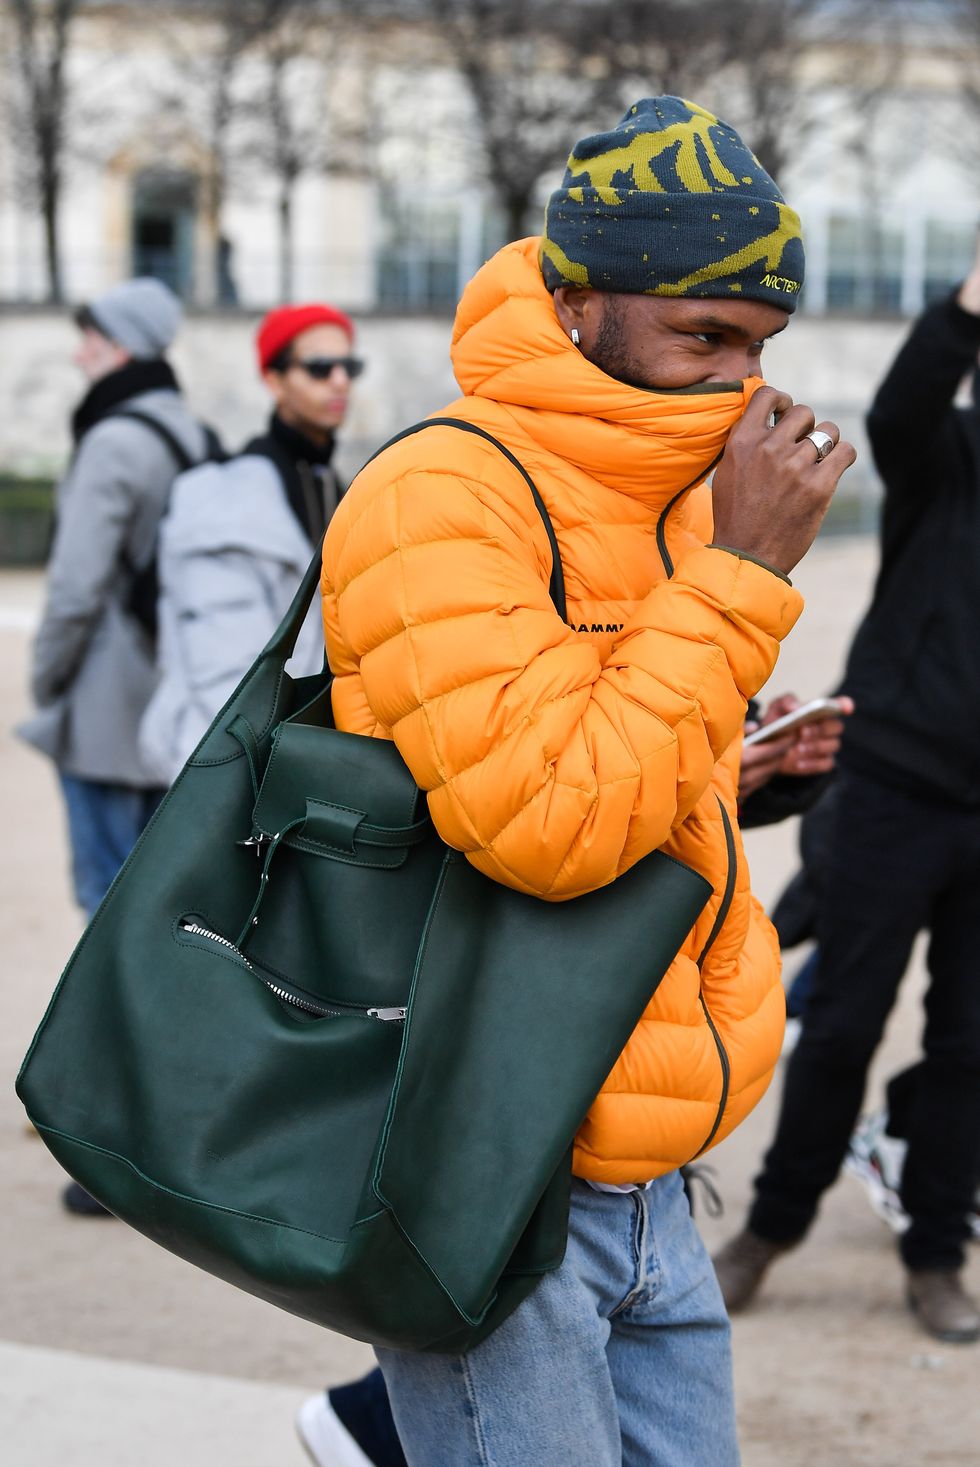 paris, france january 17 frank ocean attends the louis vuitton menswear fallwinter 2019 2020 show as part of paris fashion week on january 17, 2019 in paris, france photo by jacopo raulegetty images